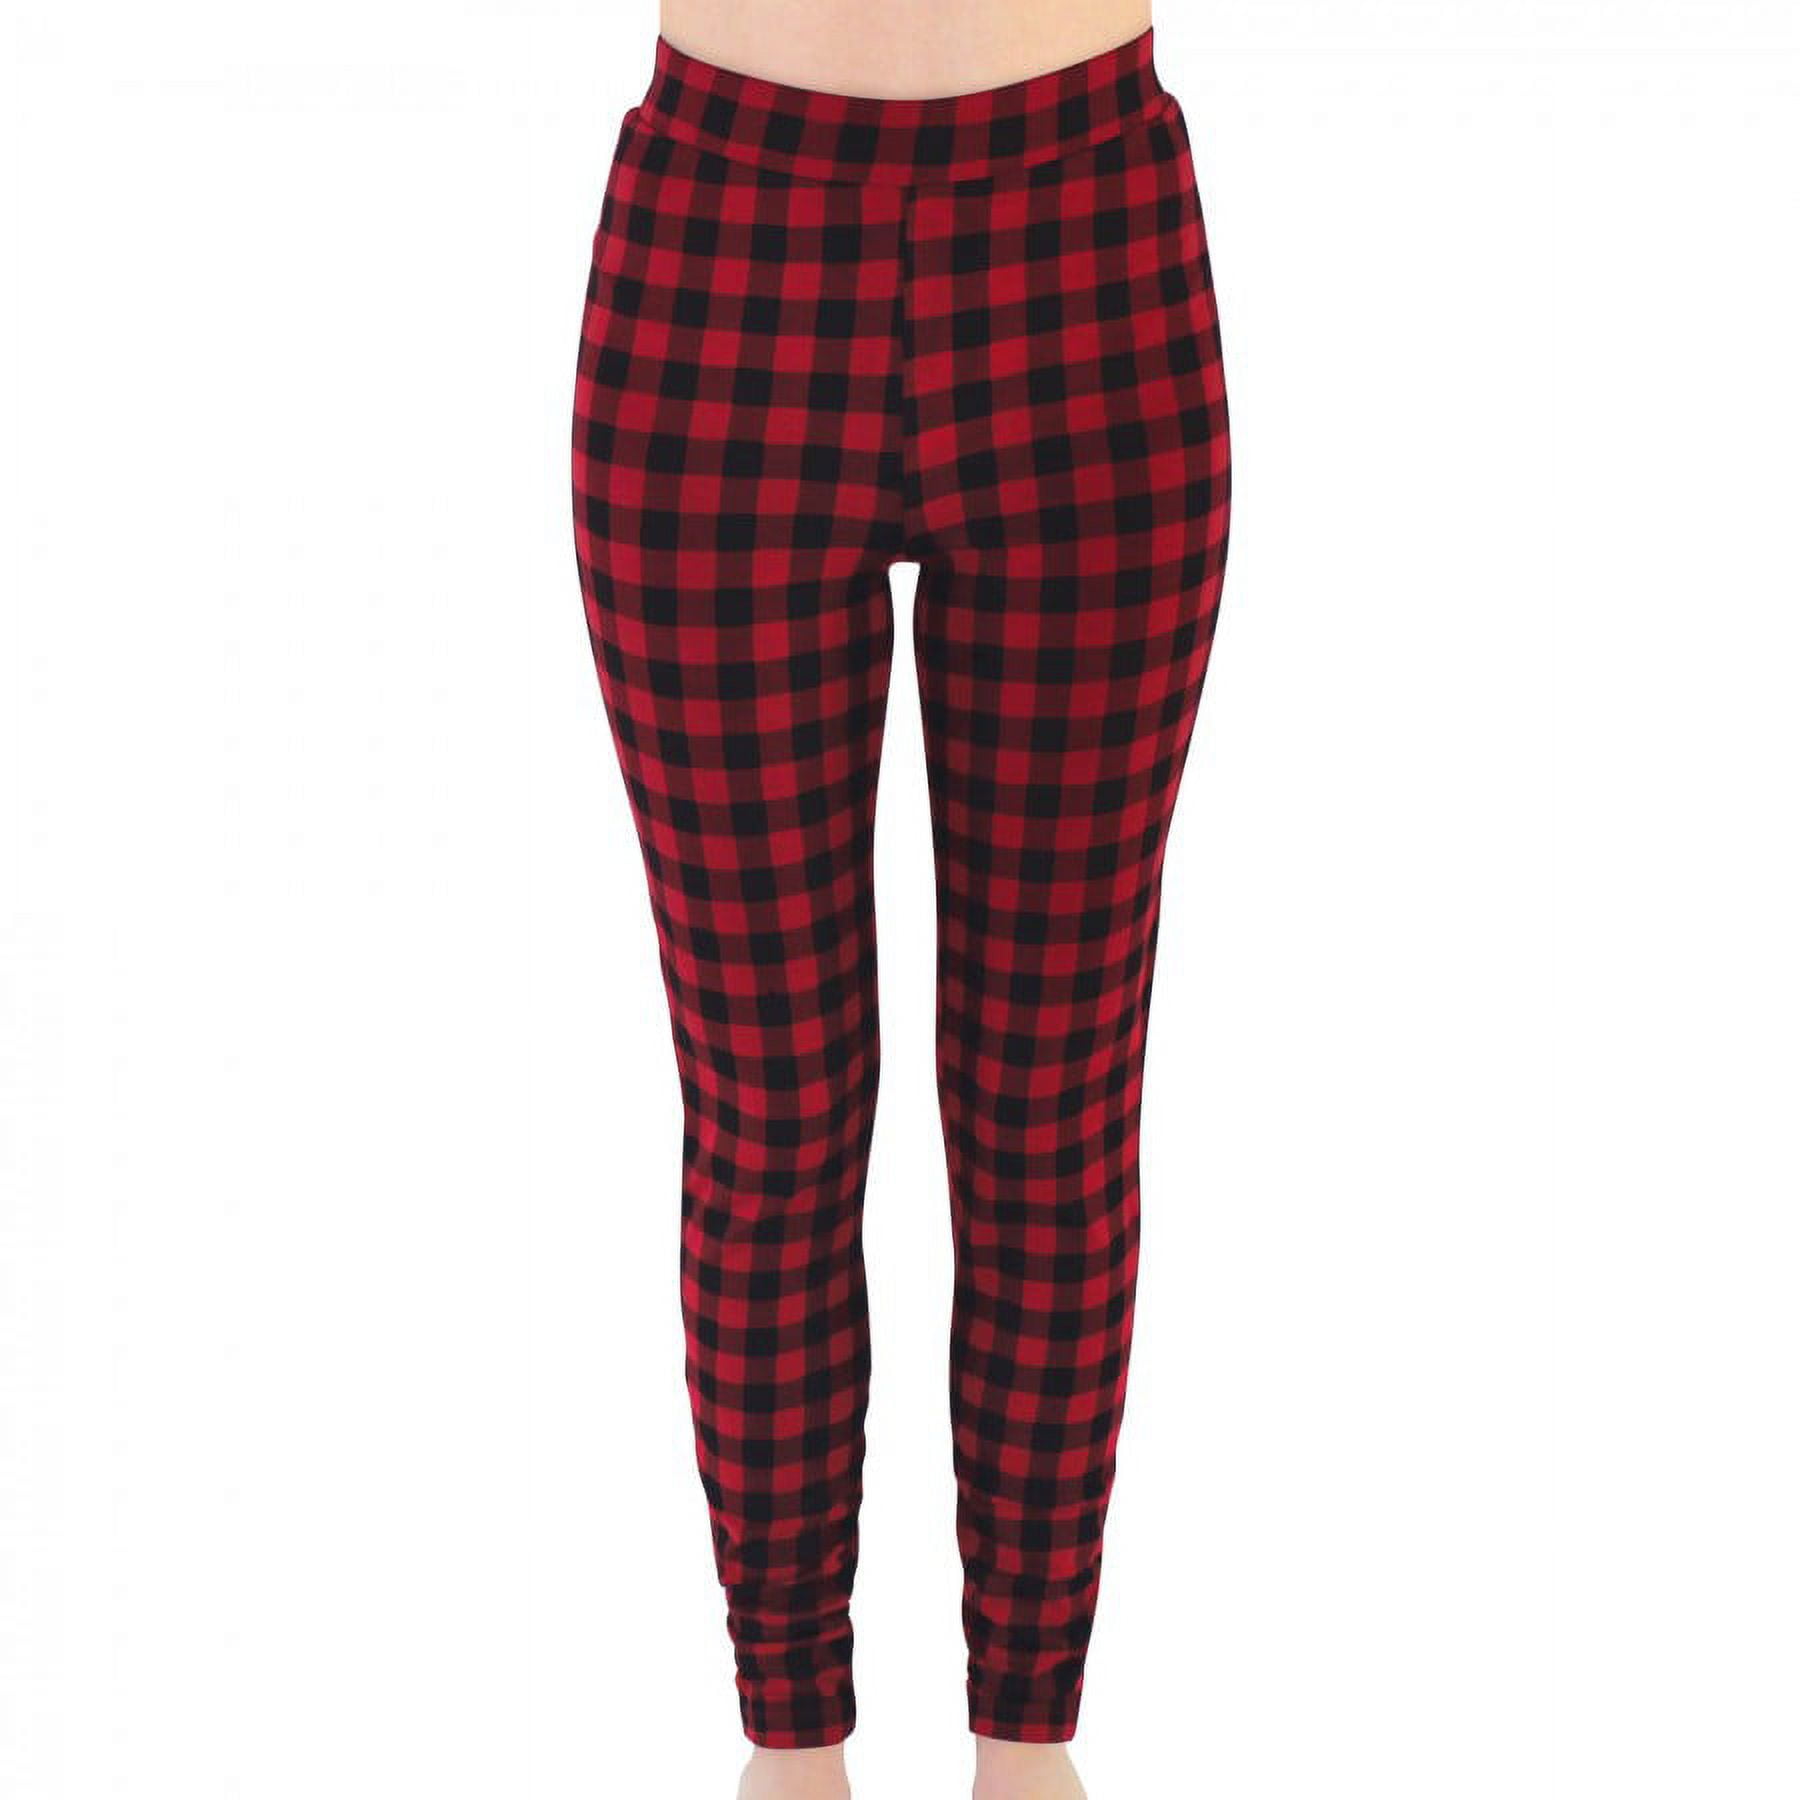 Touched by Nature Womens Organic Cotton Leggings, Buffalo Plaid